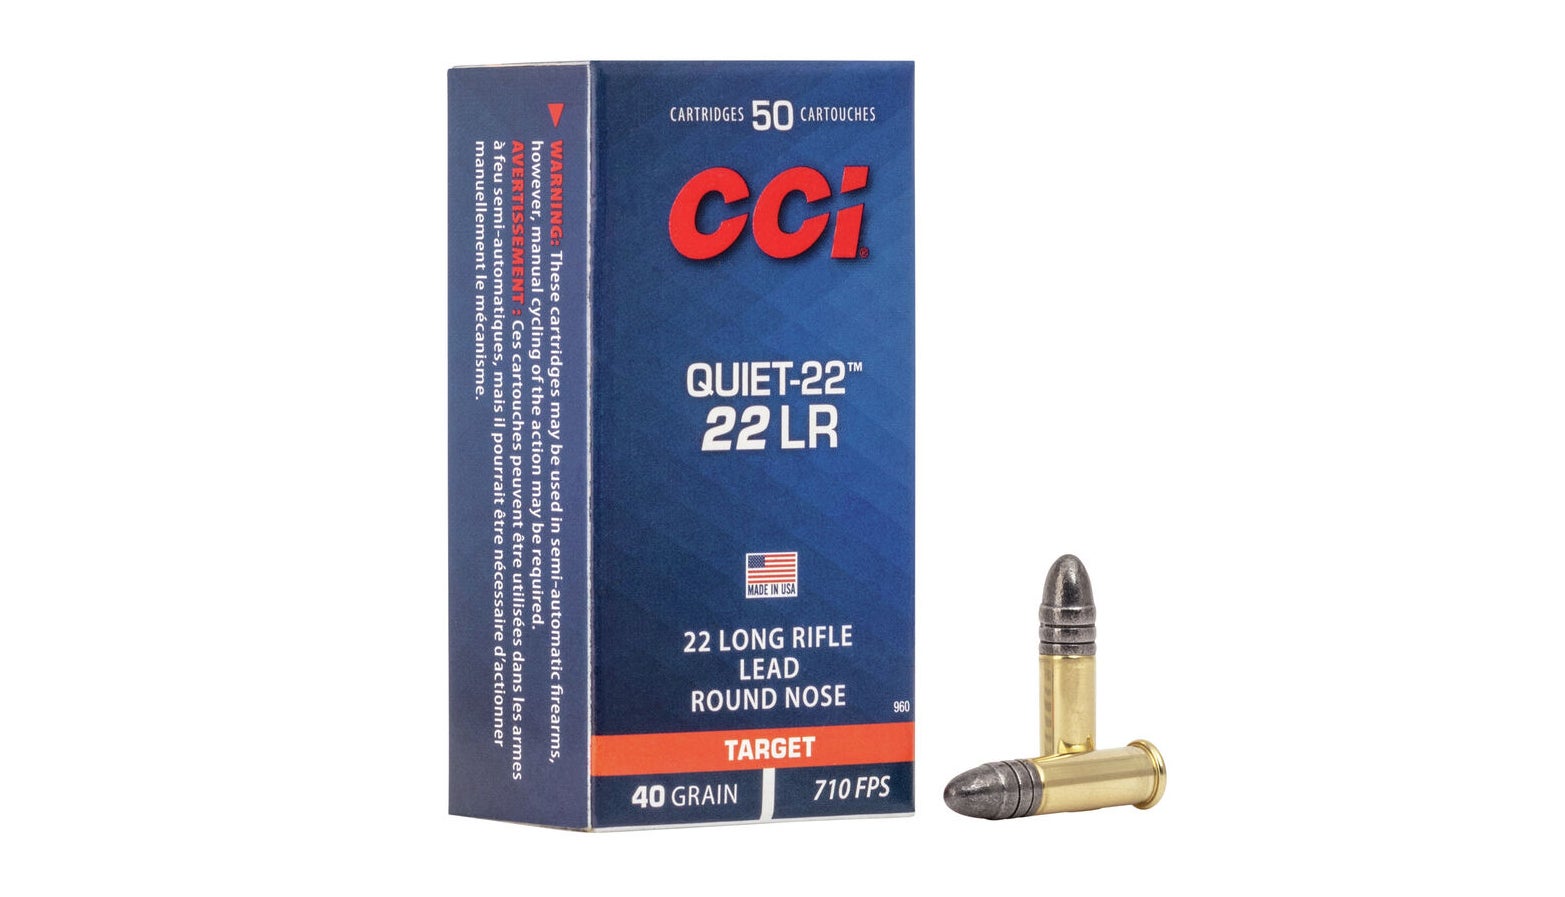 A box of CCI 22 LR ammo with two loose cartridges on white background